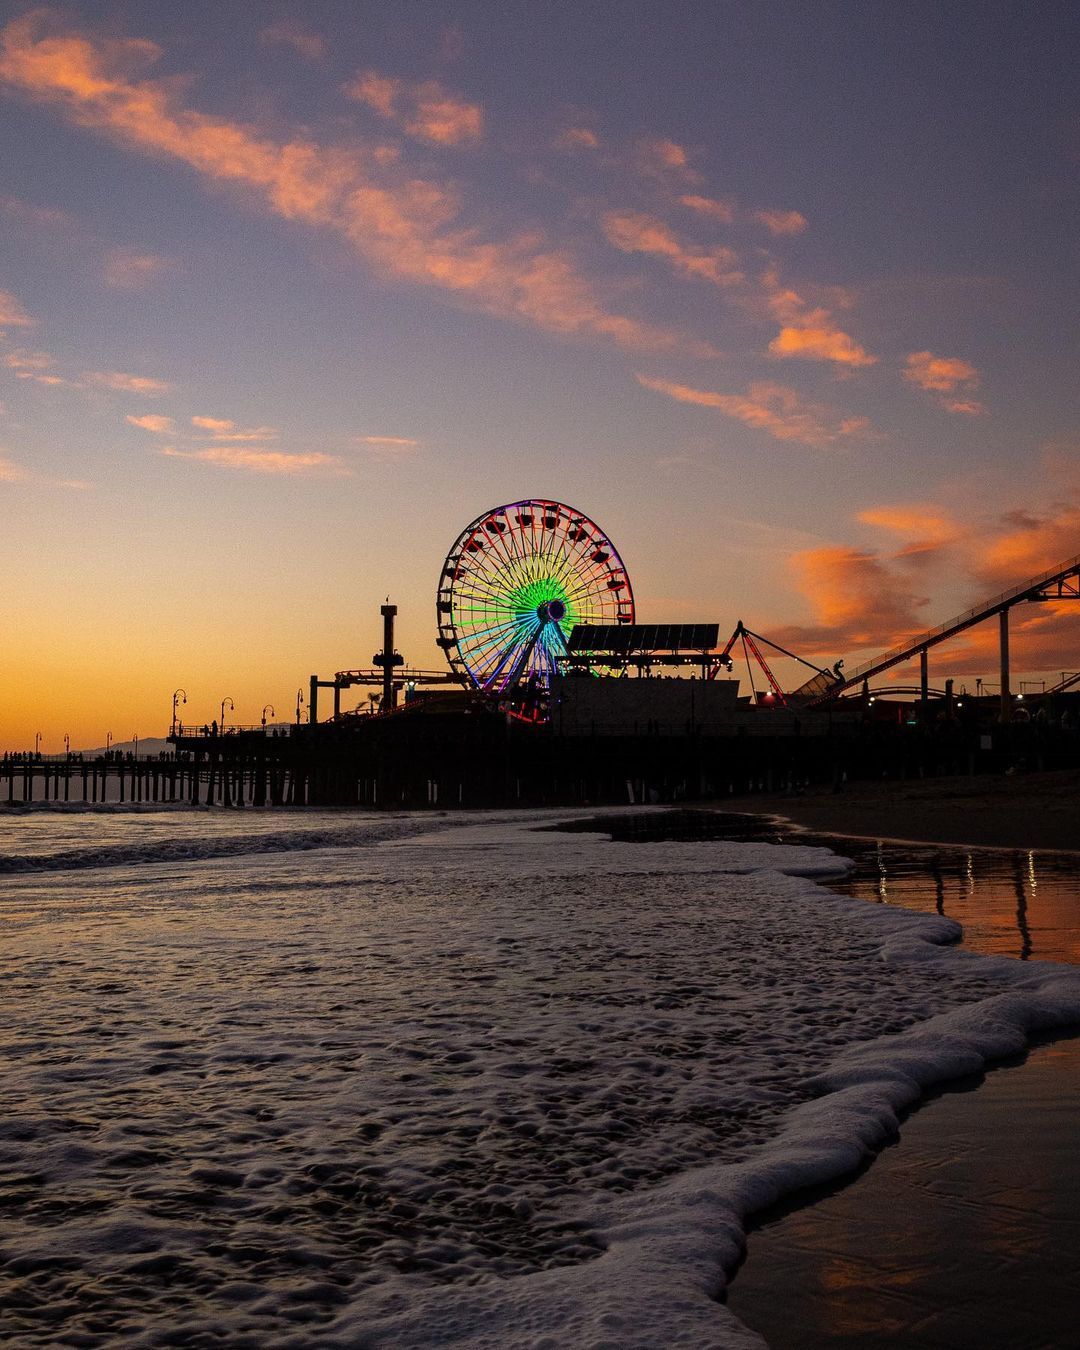 @Hulu & @DisneyPlus have partnered to bring @LoveVictorHulu  to the world-famous Pacific Wheel.🎡  There will also be a rainbow-colored light program this weekend celebrating LGBTQ+ stories and experiences, all part of the city-wide SaMo PRIDE celebrations! 🌈  📸: @alexpelayo_13
.
.
.
#santamonica #santamonicapier #summerfun #summer #pacpark #pacificpark #familyfun #SaMoPRIDE #Pride #Pride2022 #LAPride #PrideMonth #LoveisLove #LoveVictor #ShareYourLove @santamonicapier @dtsantamonica @santamonicaplace @cityofsantamonica @seesantamonica